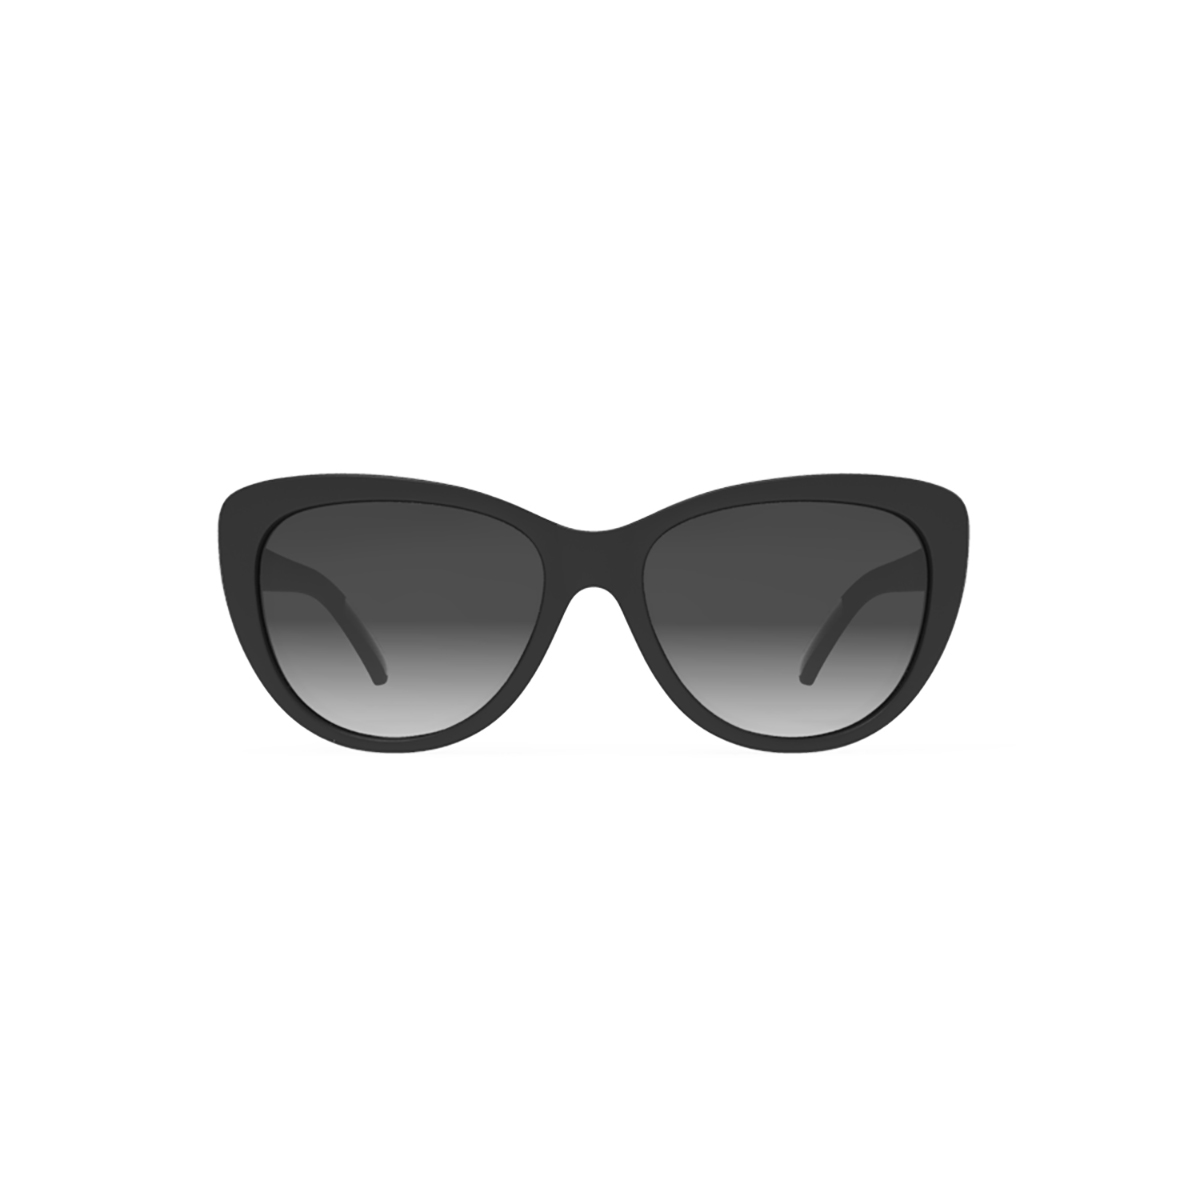 Goodr Runway Sunglasses, , large image number null